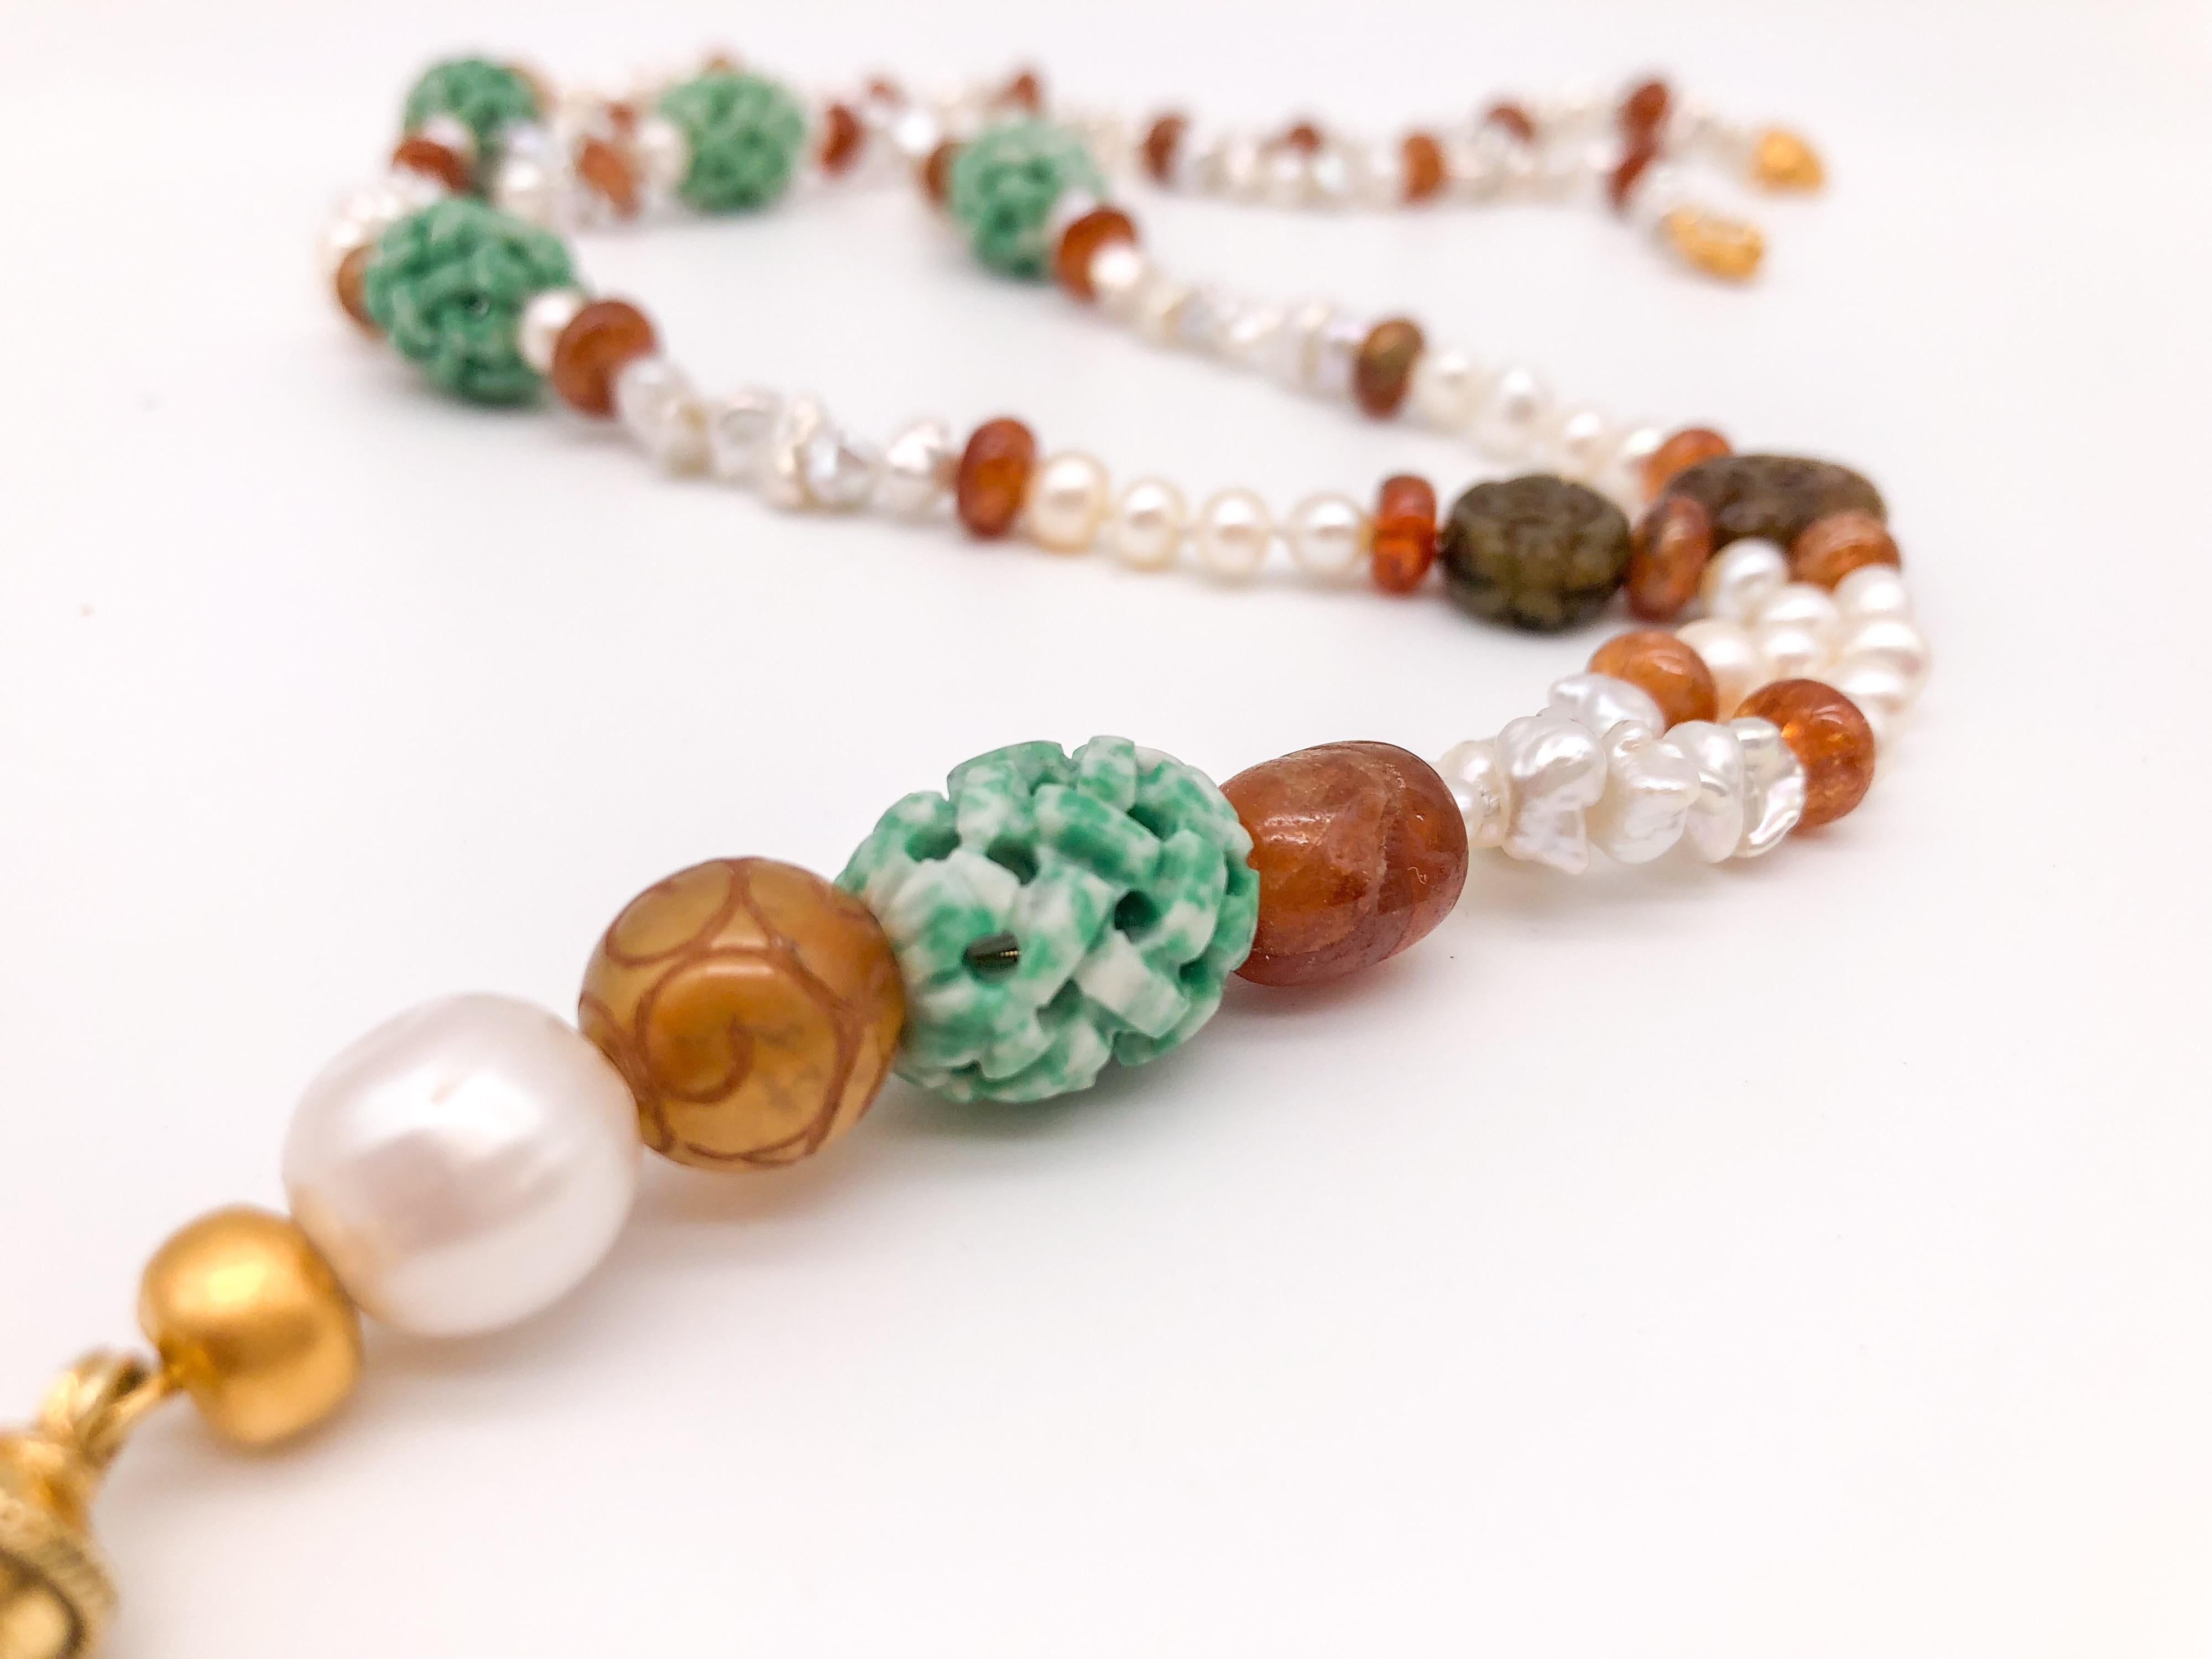 Mixed Cut A.Jeschel Splendid Long Pearl, Hessonite, and Tobacco Jade Necklace